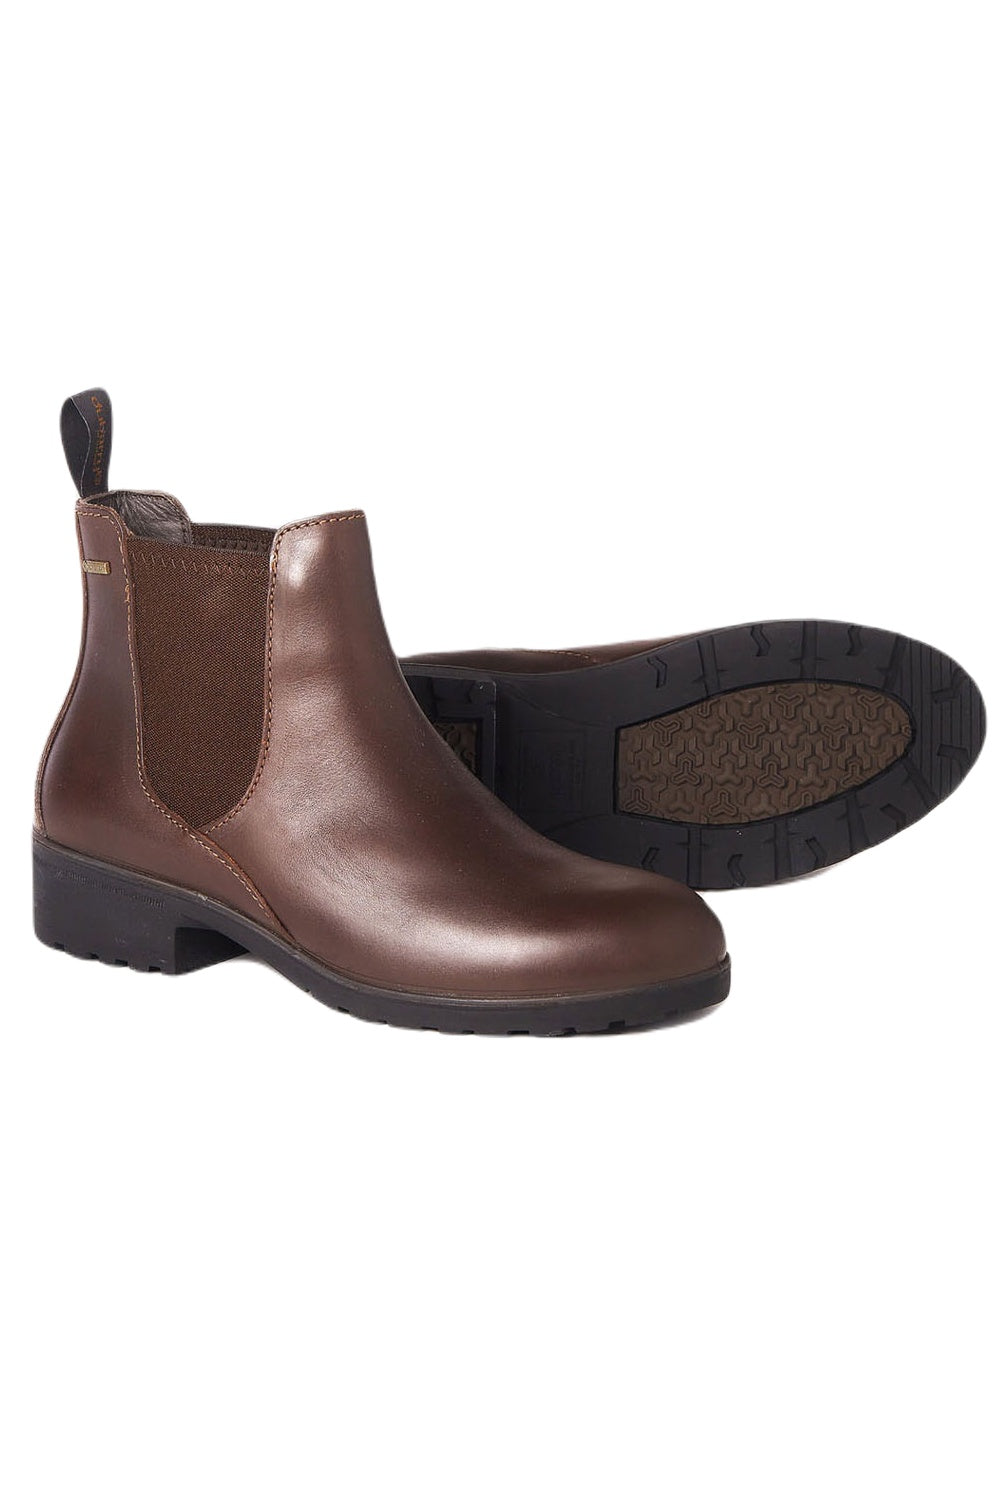 Dubarry Womens Waterford Chelsea Boots in Mahogany 